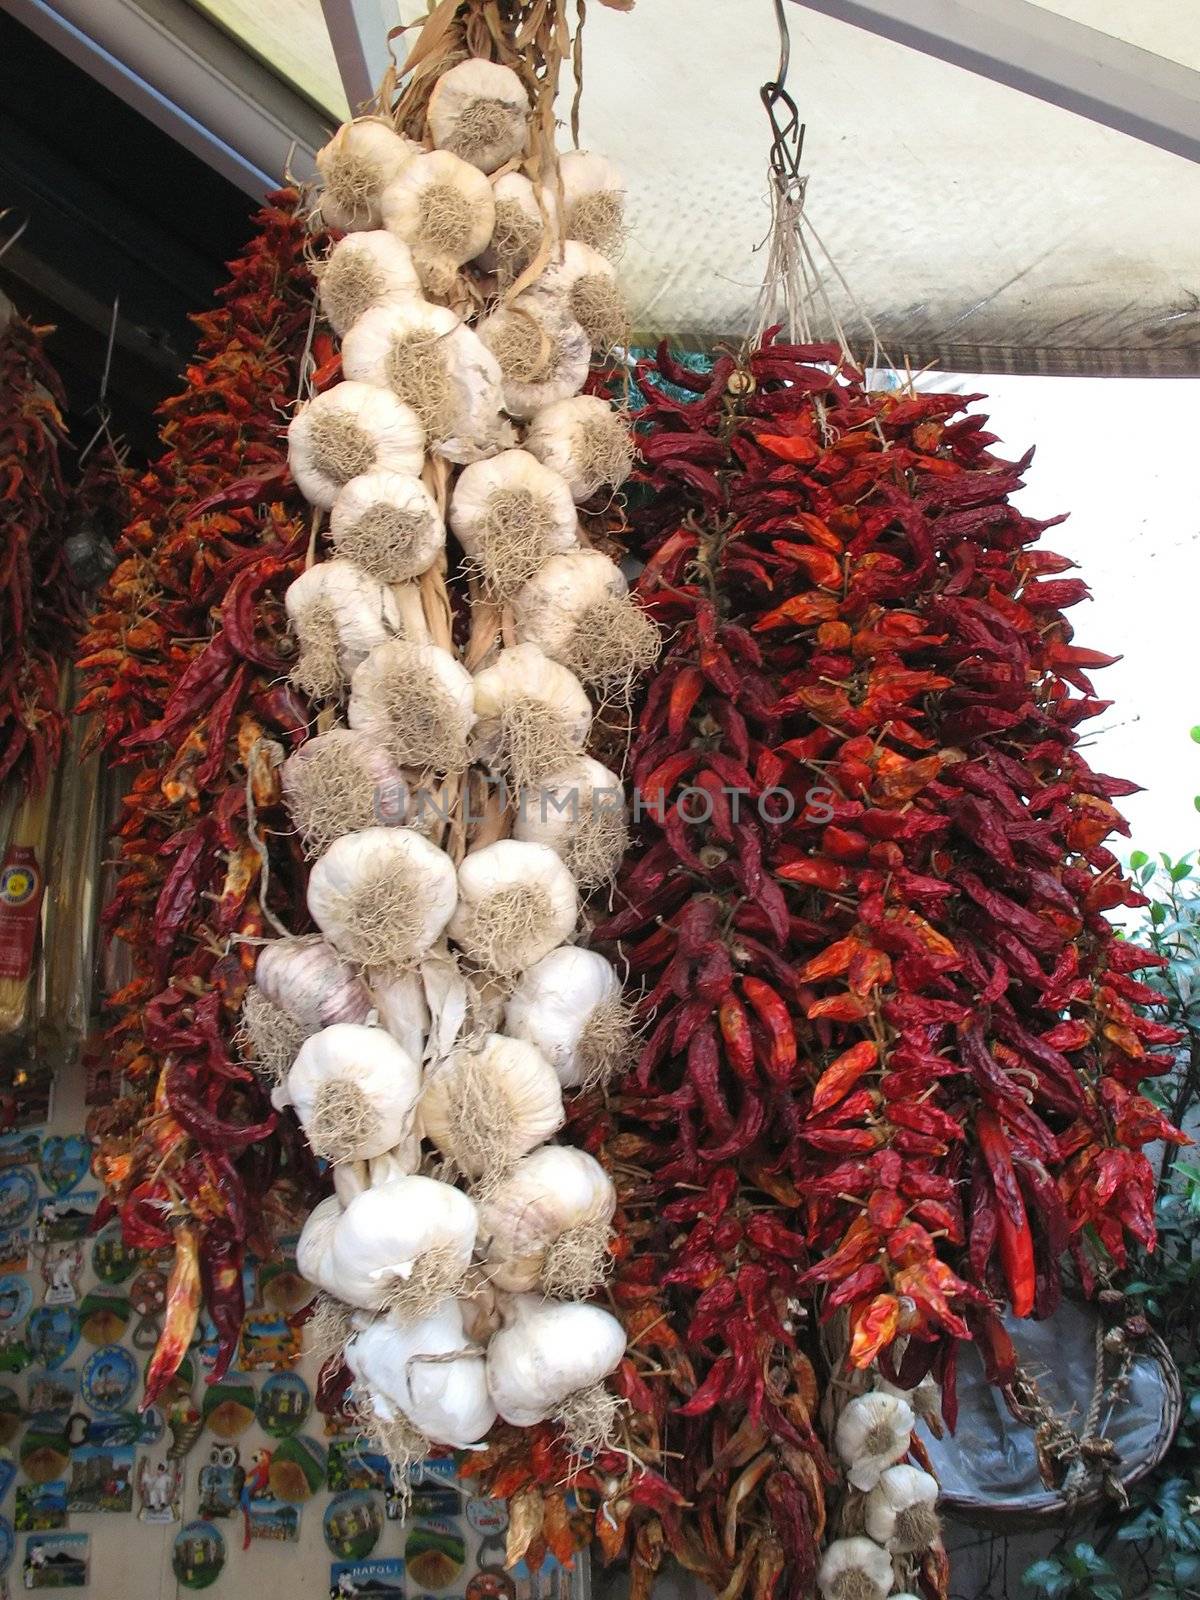 Garlic and peppers hanging in strings on the market